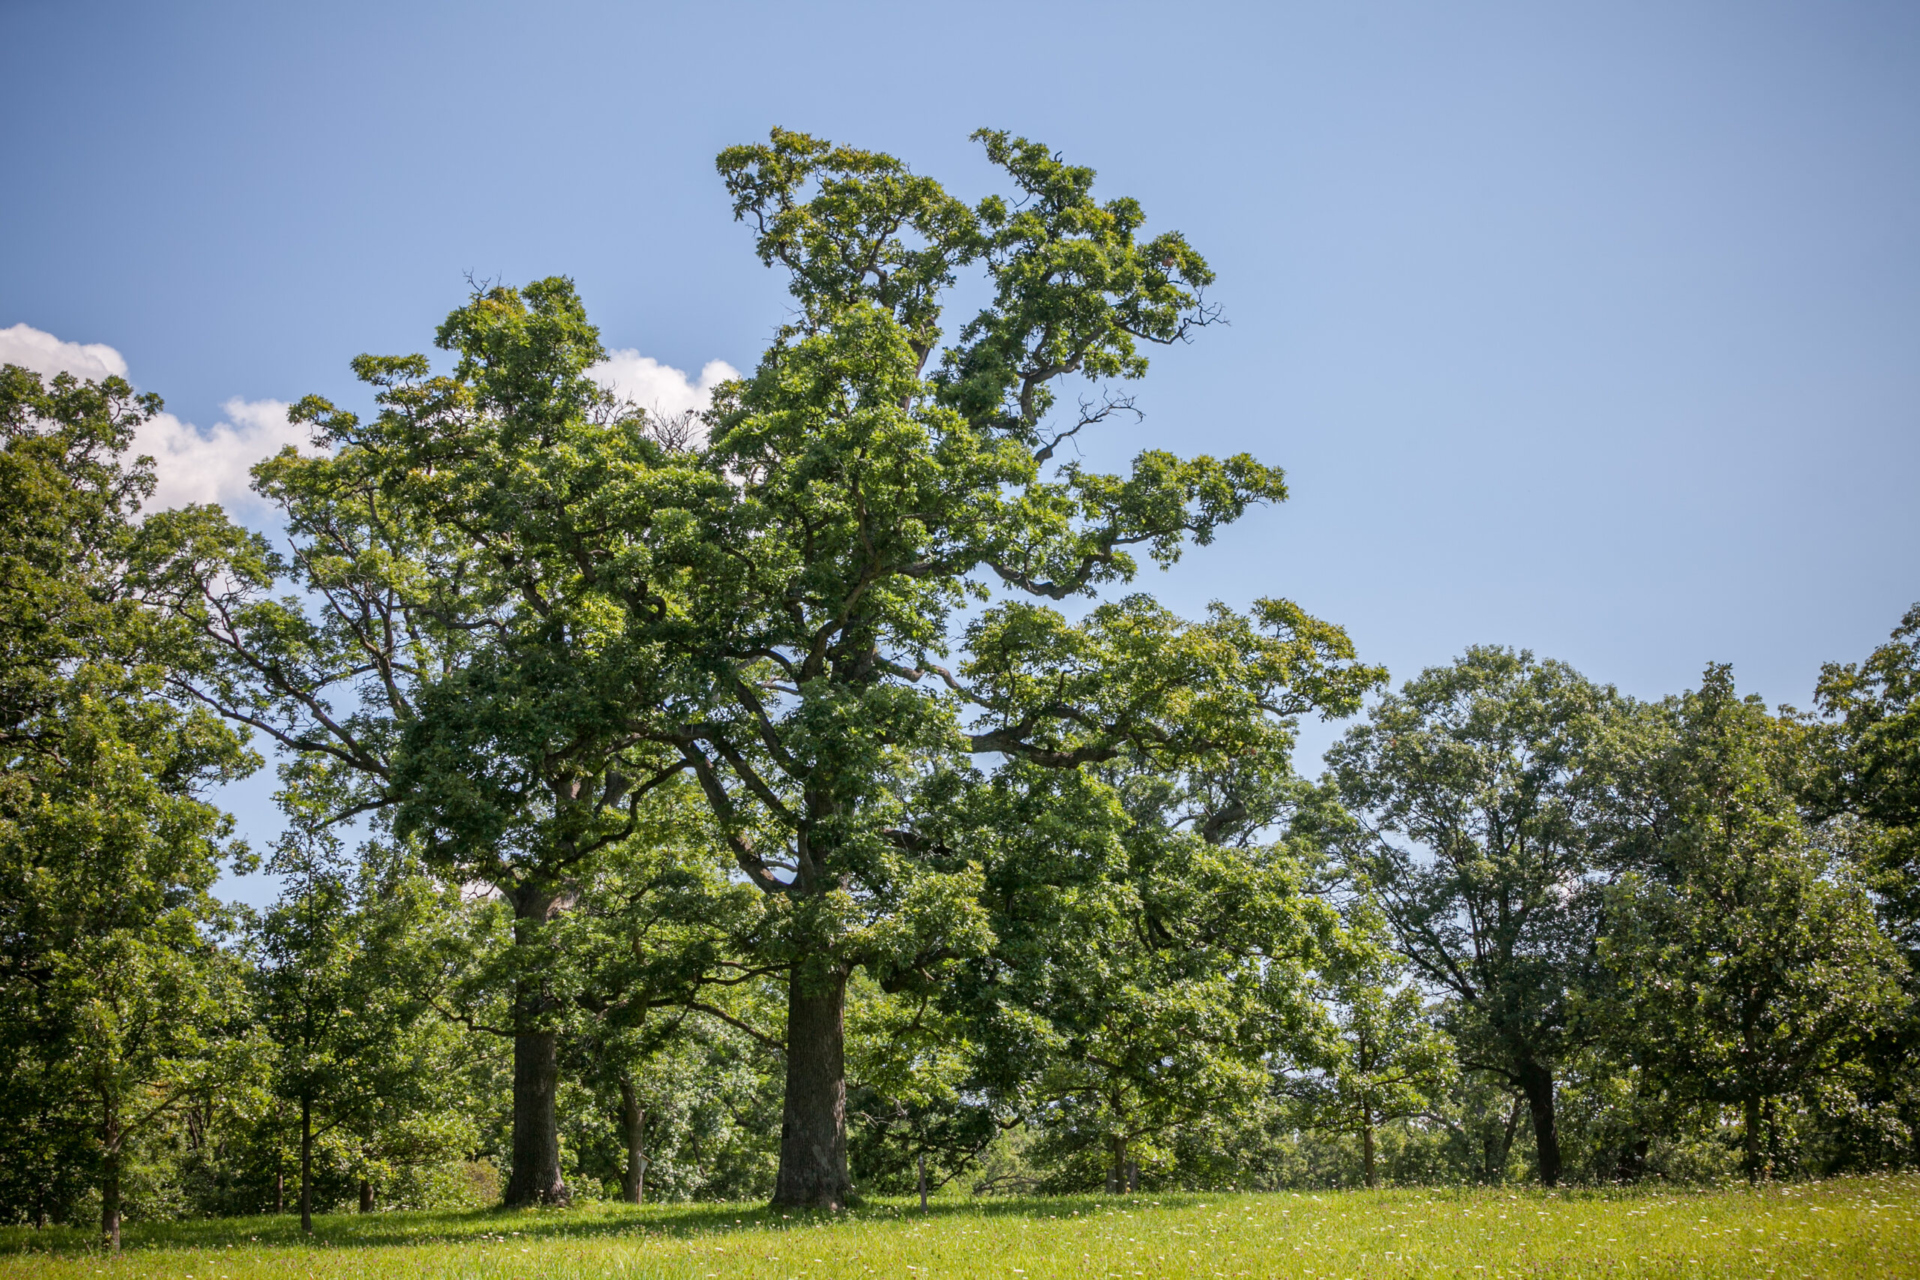 Photograph of a white oak tree suffering stress from drought